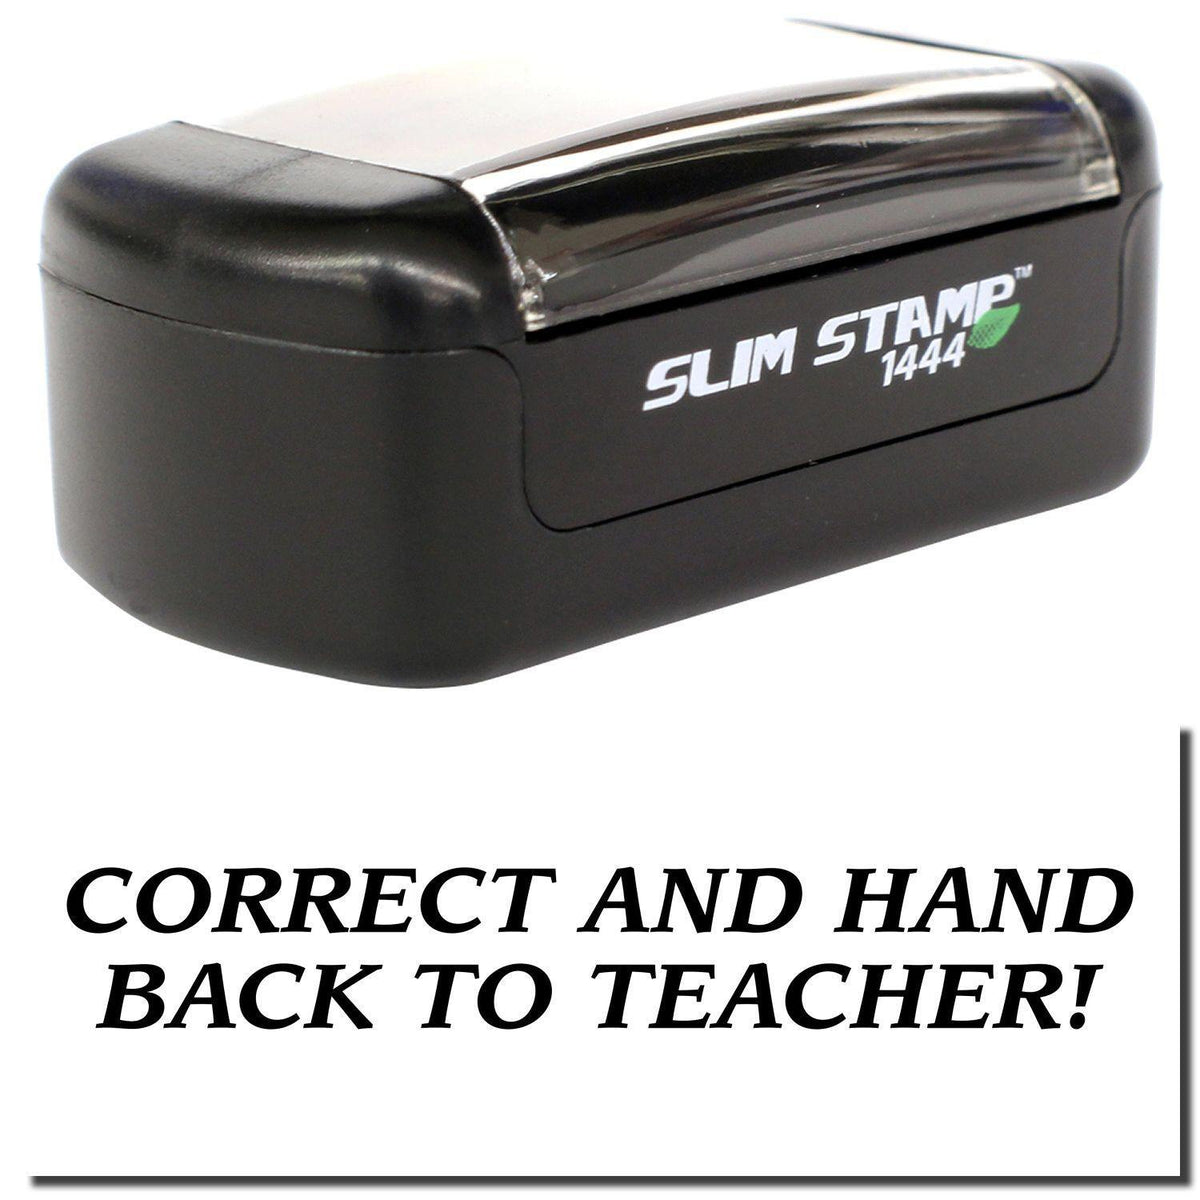 A stock office pre-inked stamp with a stamped image showing how the text &quot;CORRECT AND HAND BACK TO TEACHER!&quot; is displayed after stamping.